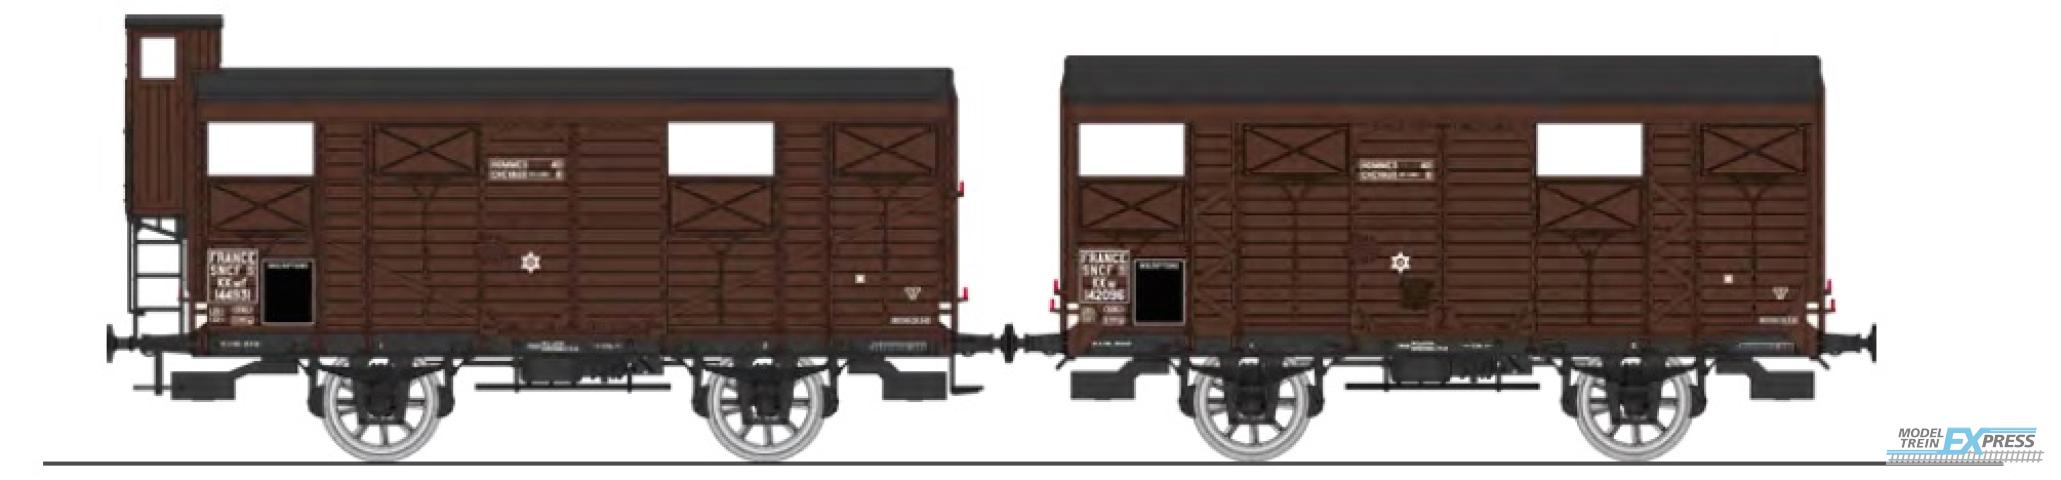 REE models WB-698 Set of 2 PLM 20 T Closed Wagon brown, N° KKwf 144931 with brakesman home et N° KKw 142096 with Z body